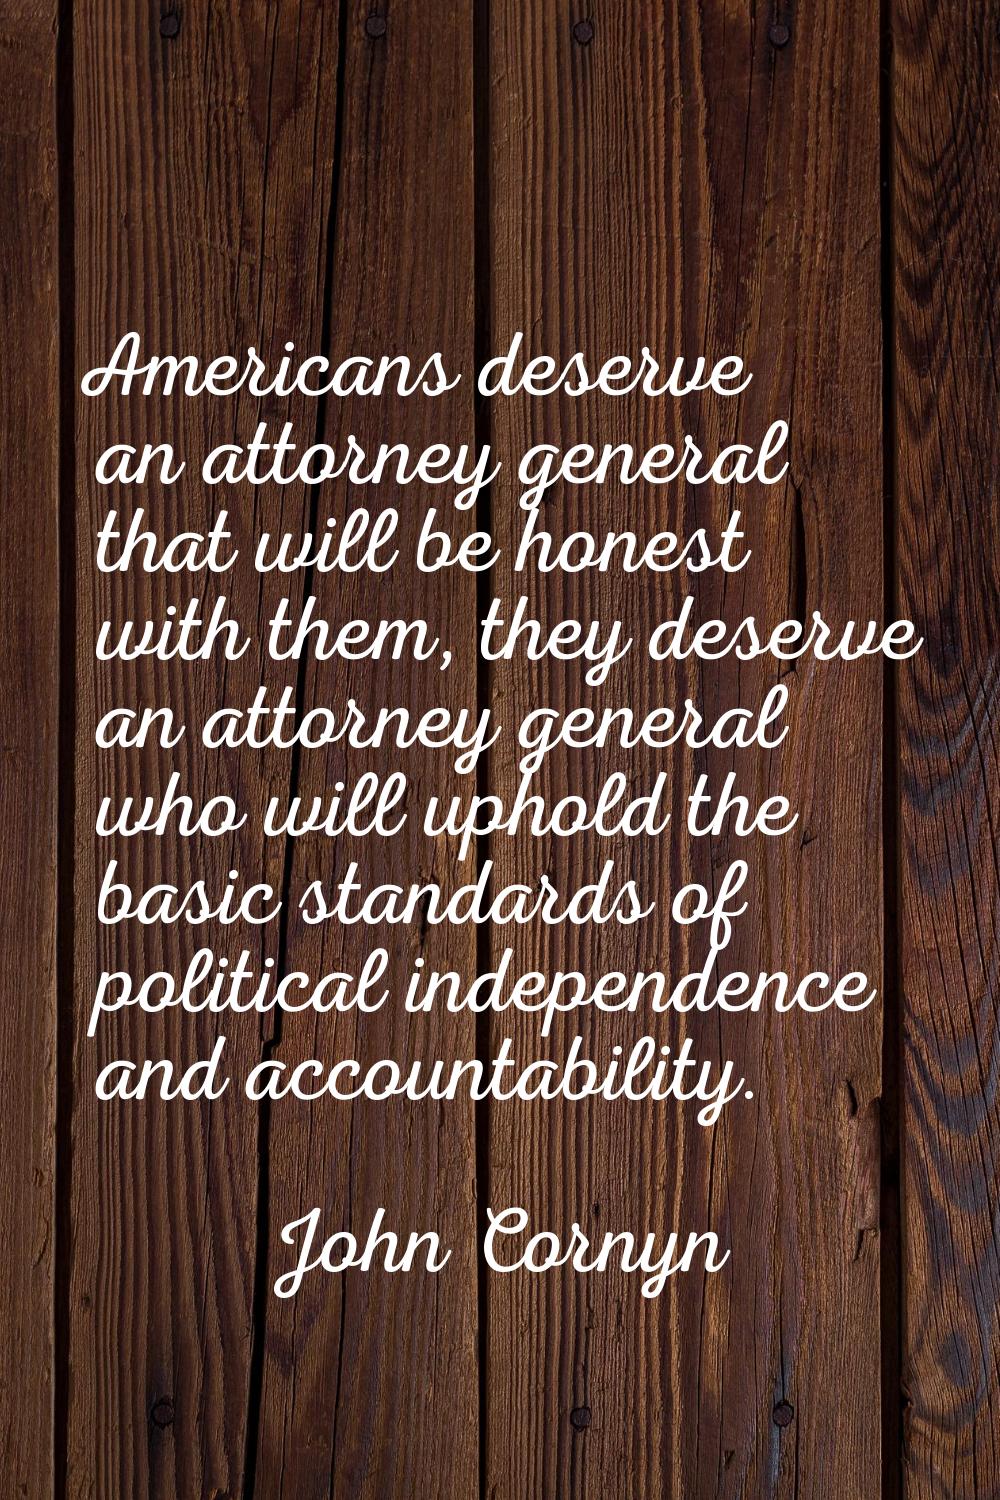 Americans deserve an attorney general that will be honest with them, they deserve an attorney gener